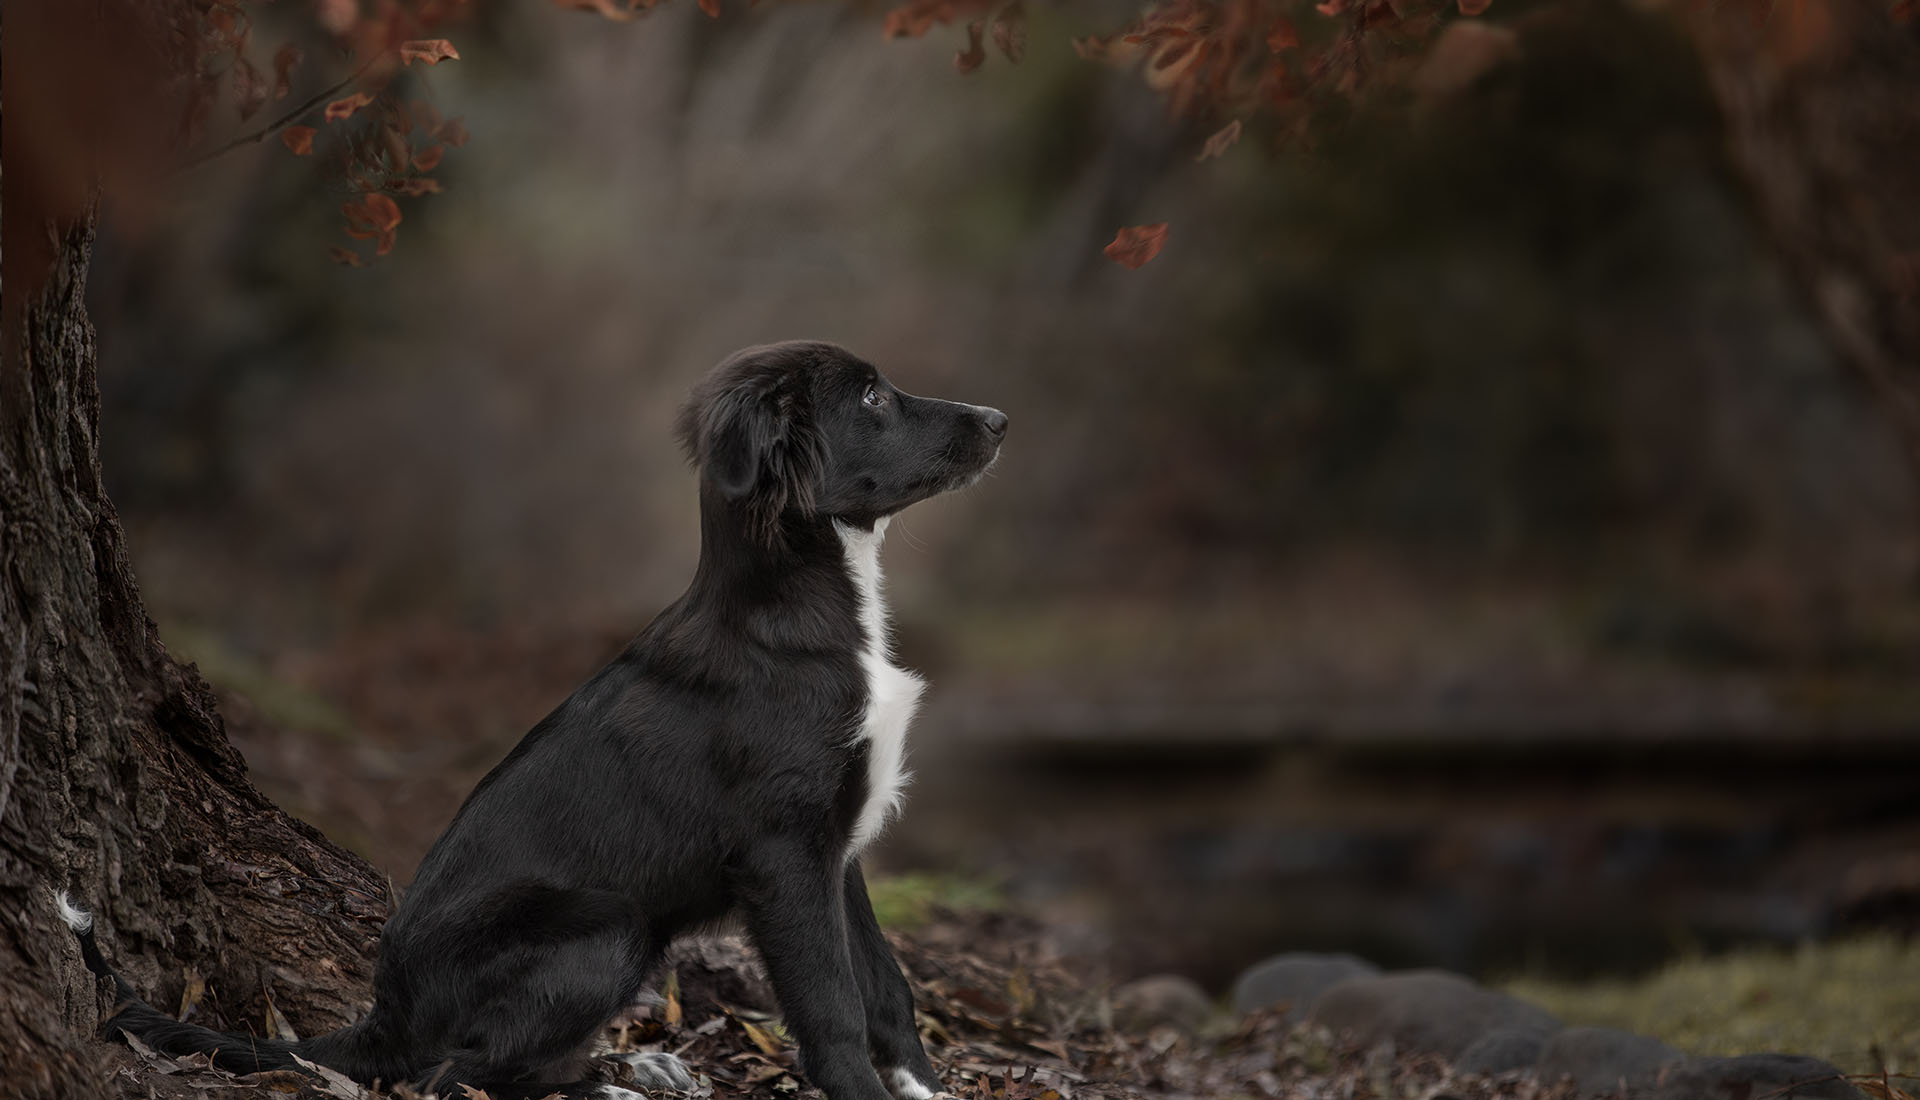 A border collie puppy sits in a pile of leaves